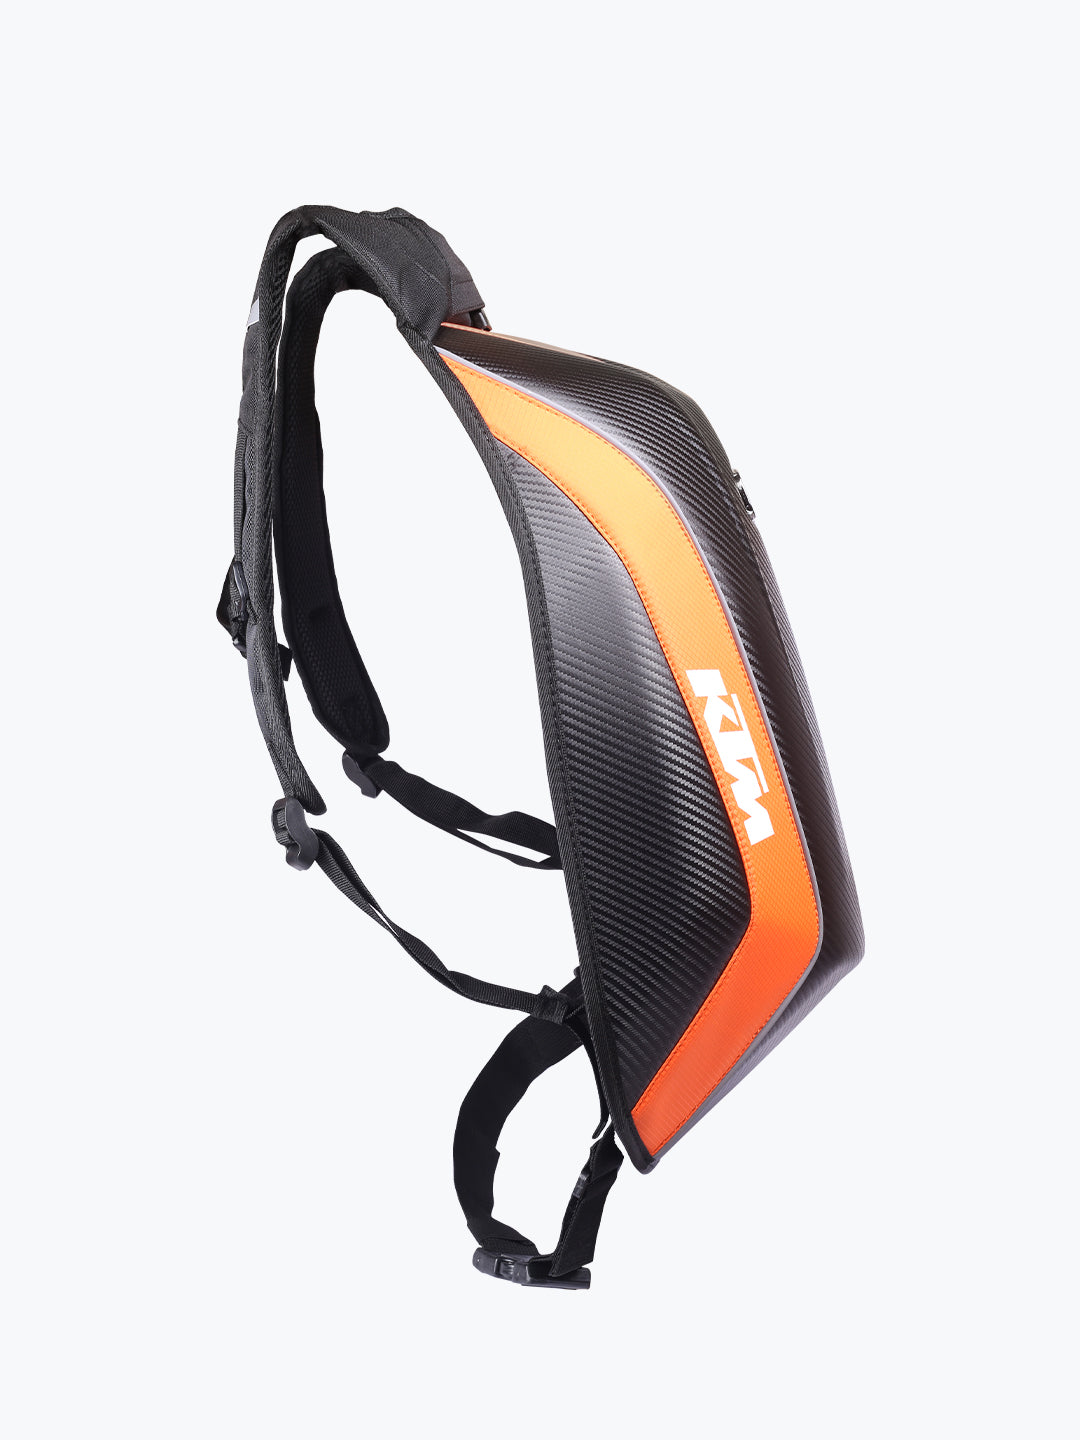 Mojave Saddlebag and Possibles Pouch on a KTM 690 Enduro R - Giant Loop